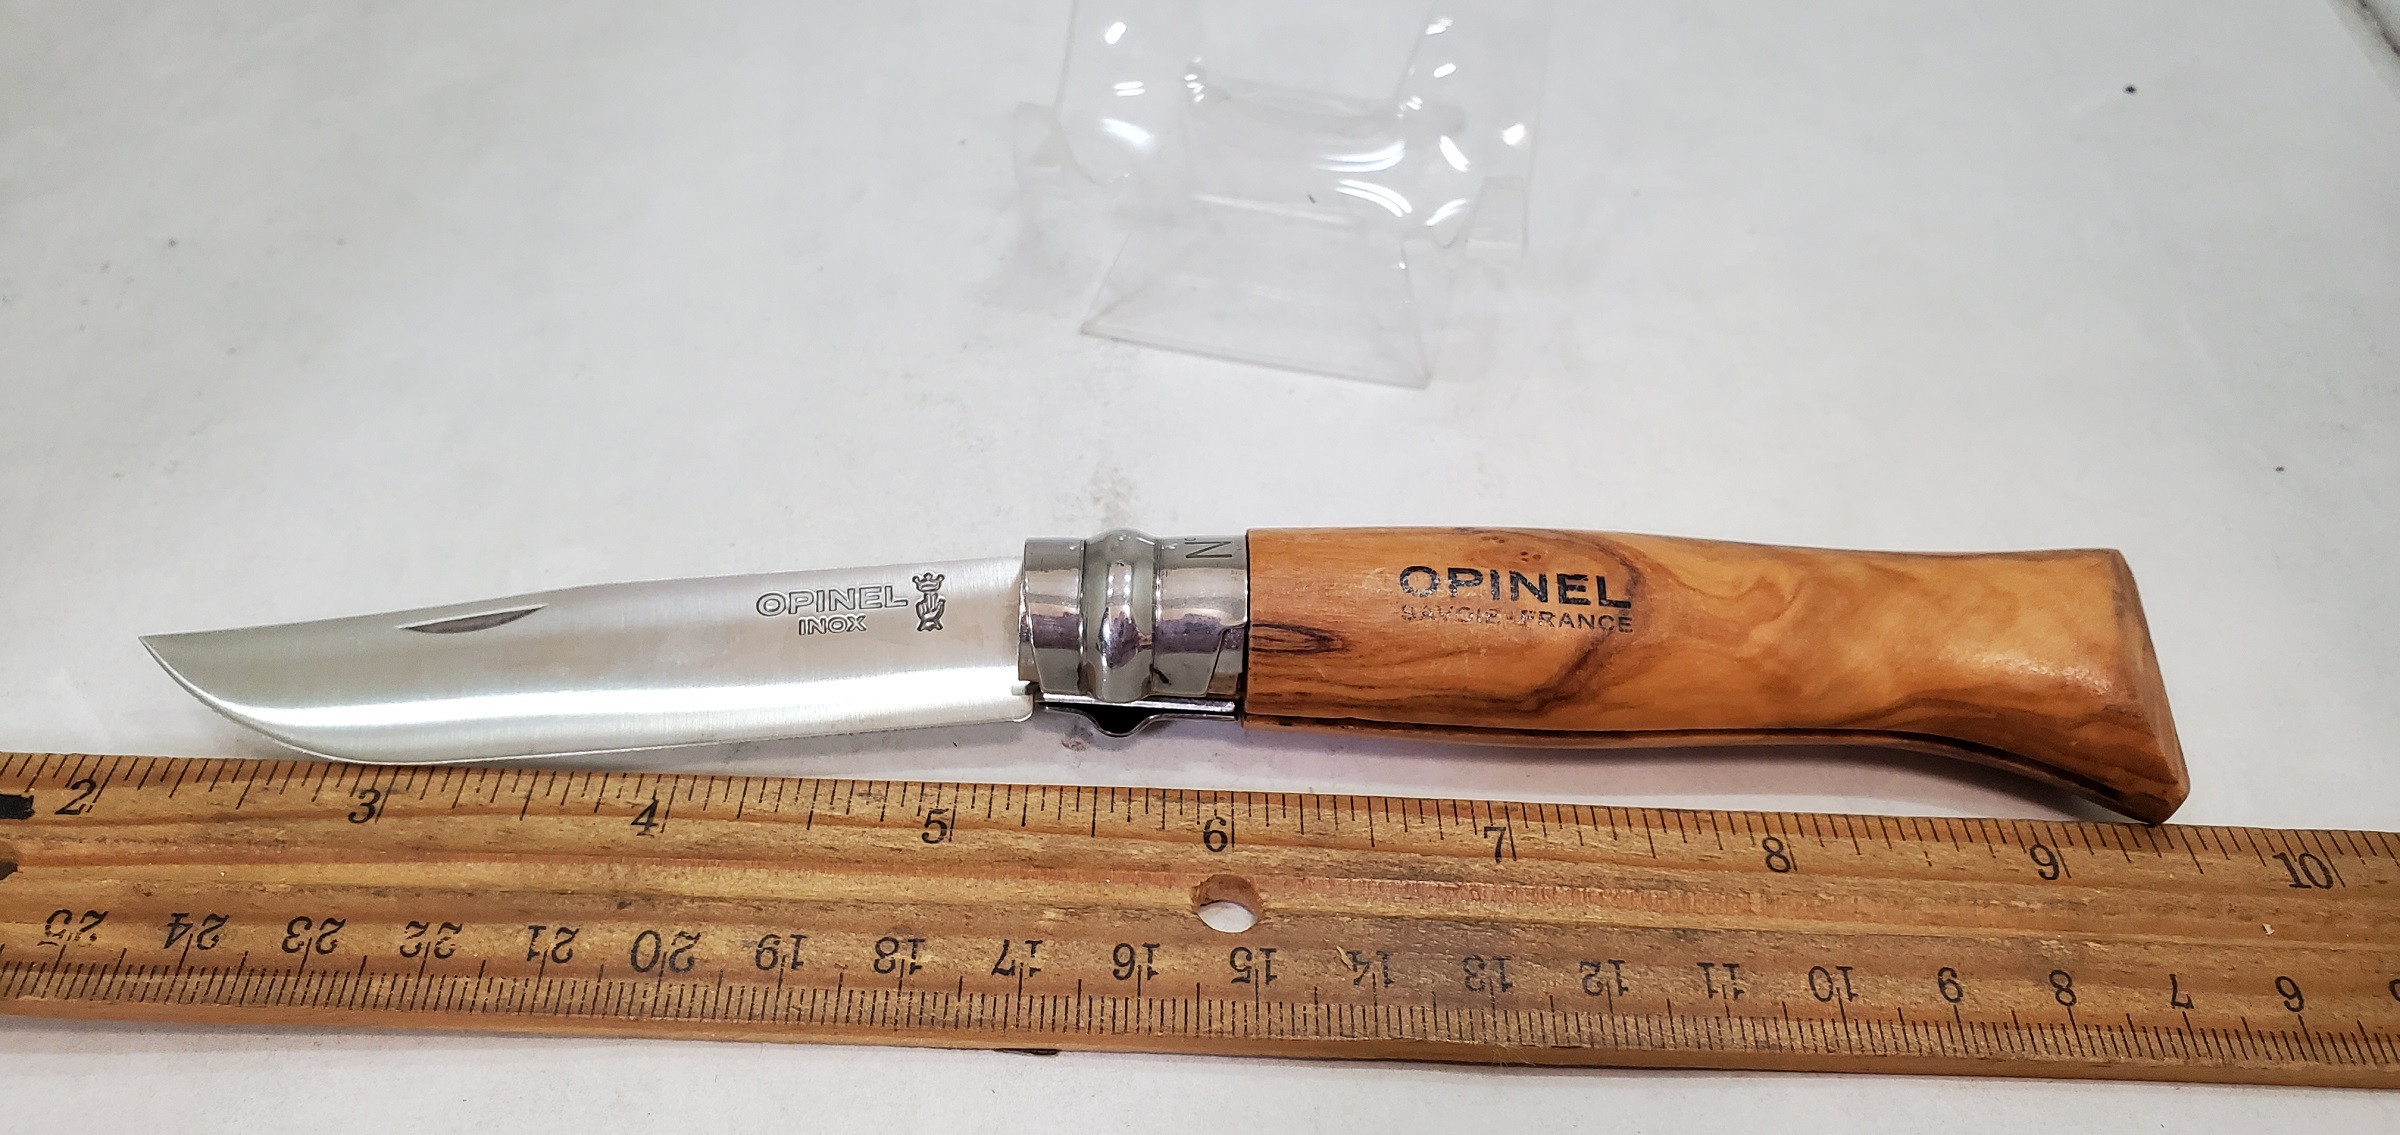 The Opinel CP-00899 Olive Wood measures 4-3/8″ closed.